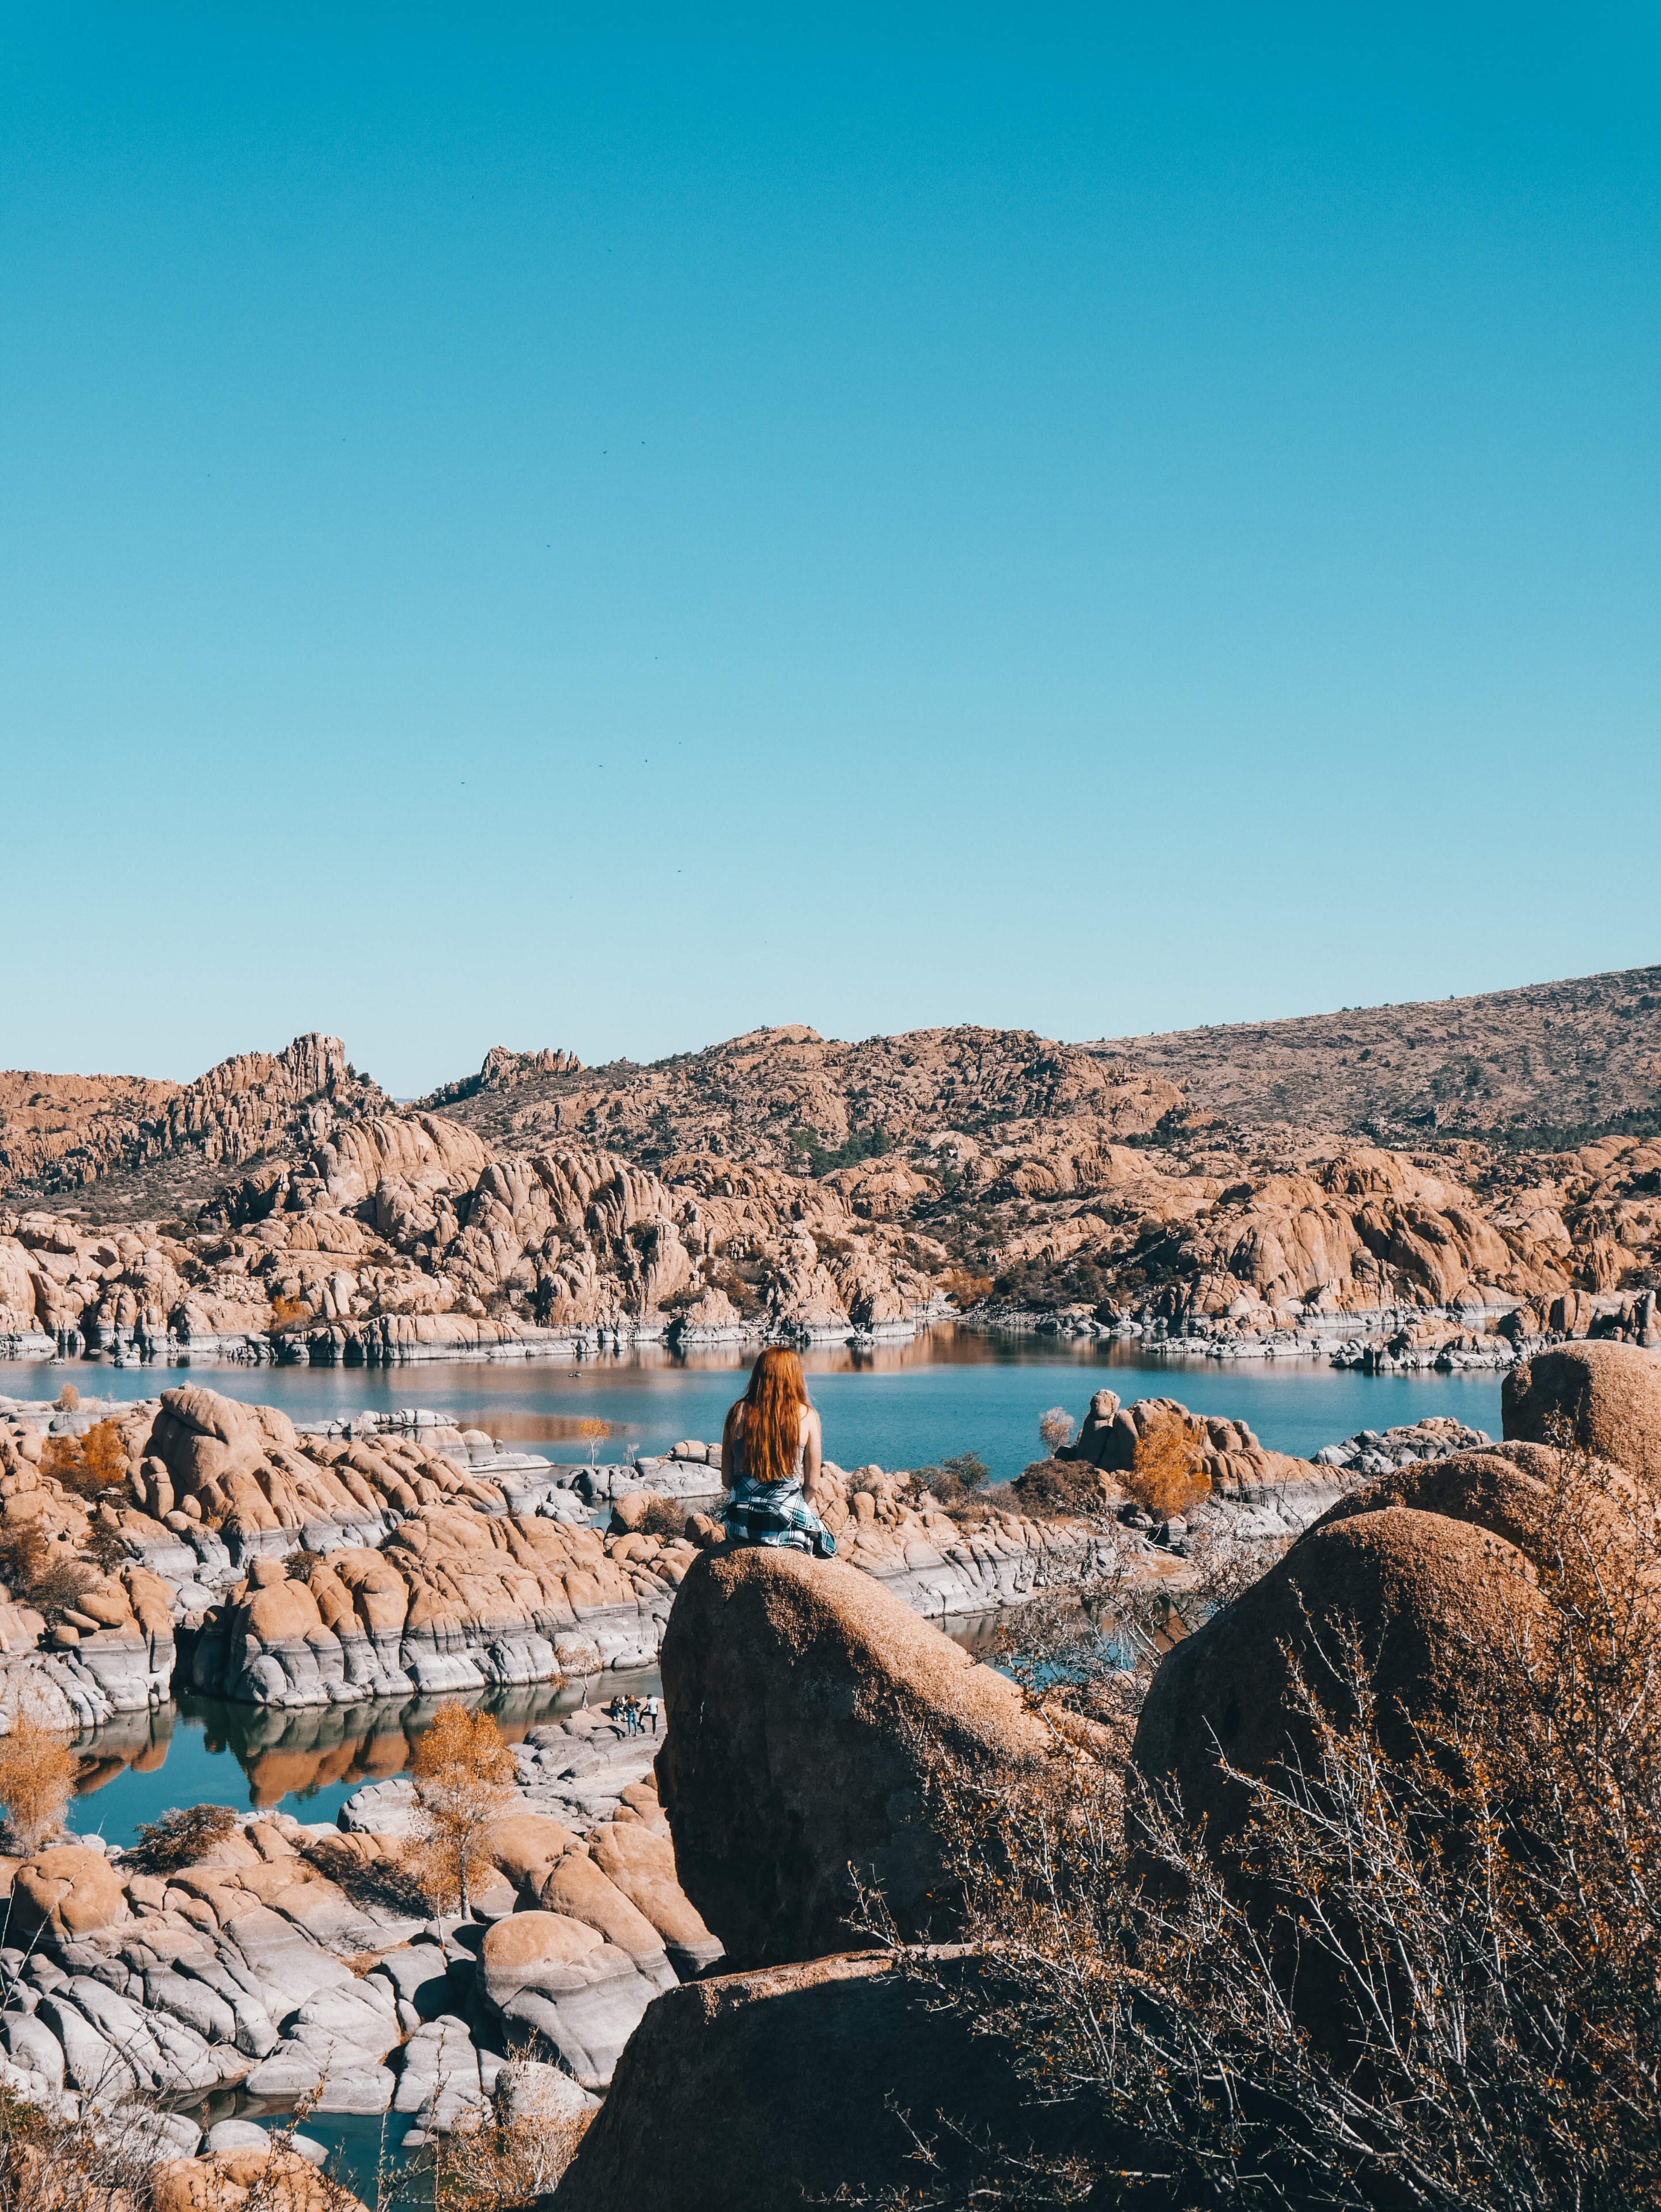 Watson Lake was one of the coolest desert lakes I've seen! It was surrounded by awesome rock formations that made for a fun hike with plenty of scrambling.

Quick Tip: Bring your climbing gear and rope up! There are quite a few bolted routes near the lake.
#Arizona #Adventure
#Trovember